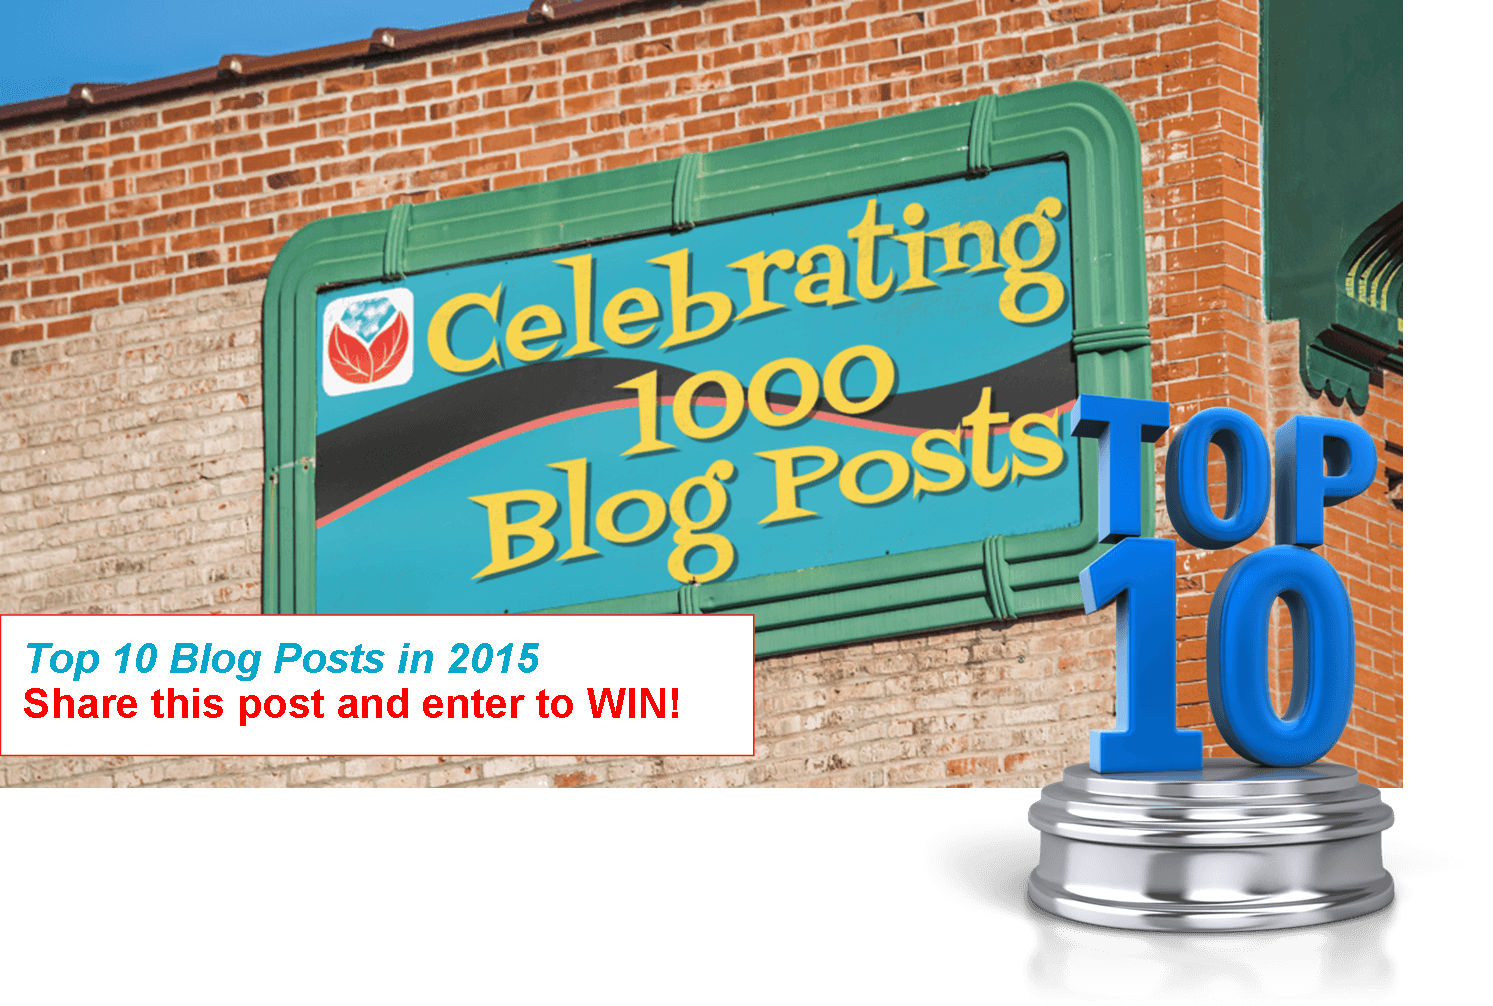 Top 10 Genealogy Gems Blog Posts: Share and Enter to Win!